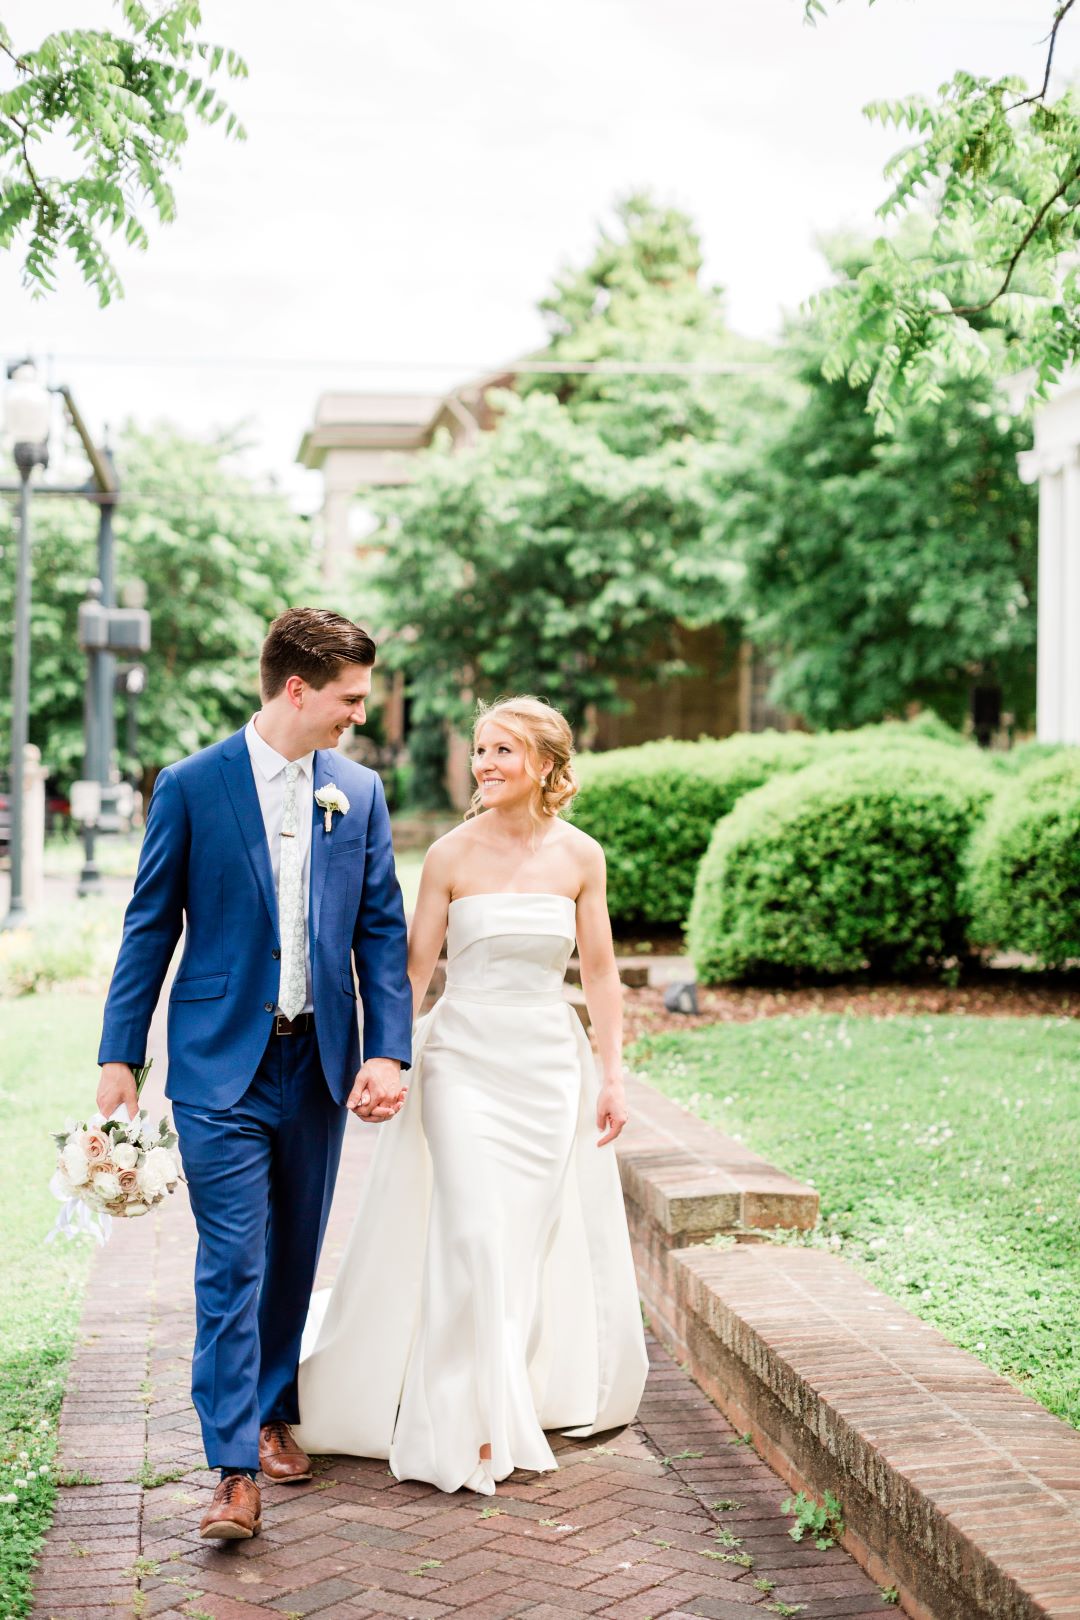 CJ's Off The Square | Bride and groom walking down brick walkway in front of lush greenery